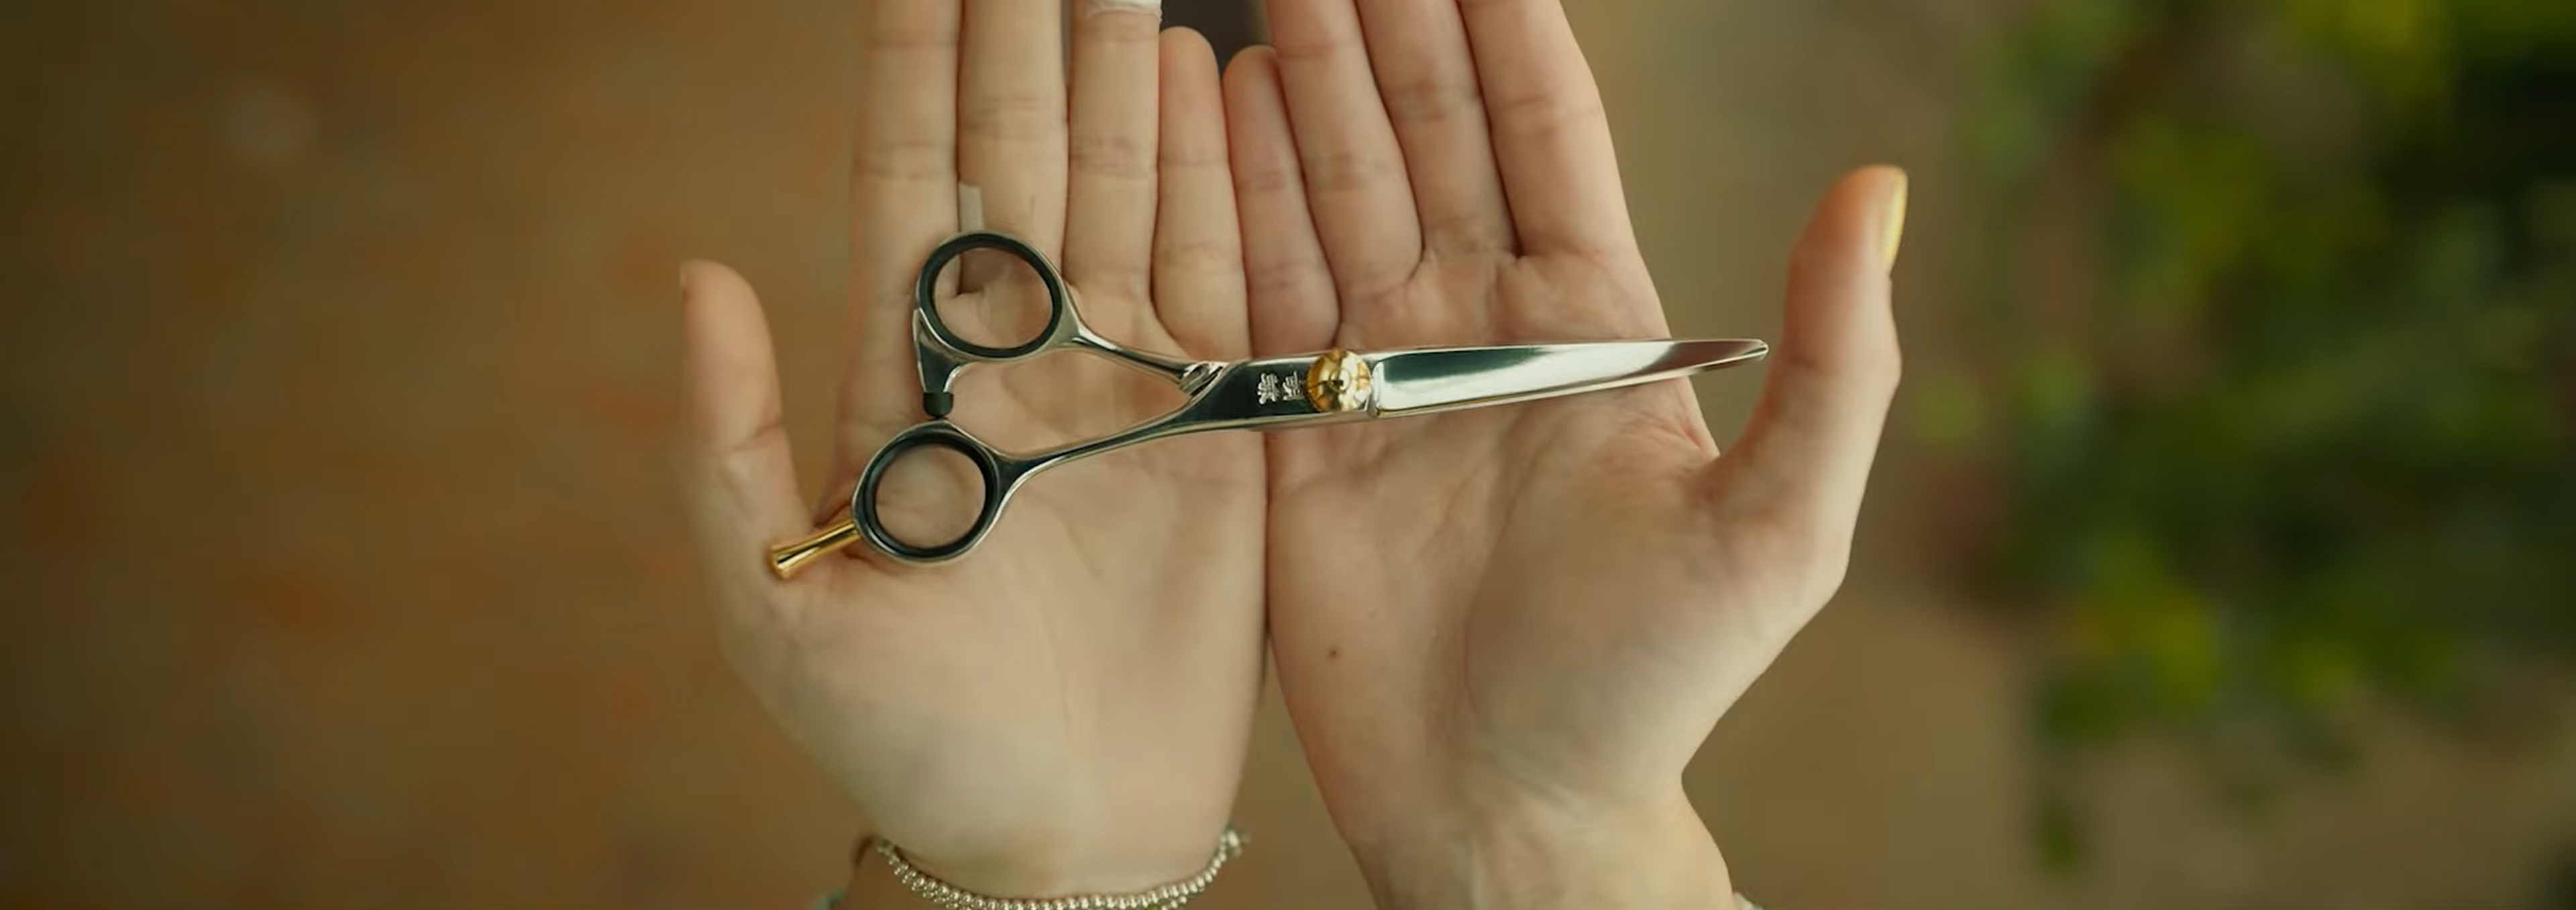 A pair of scissors in someone's hands.